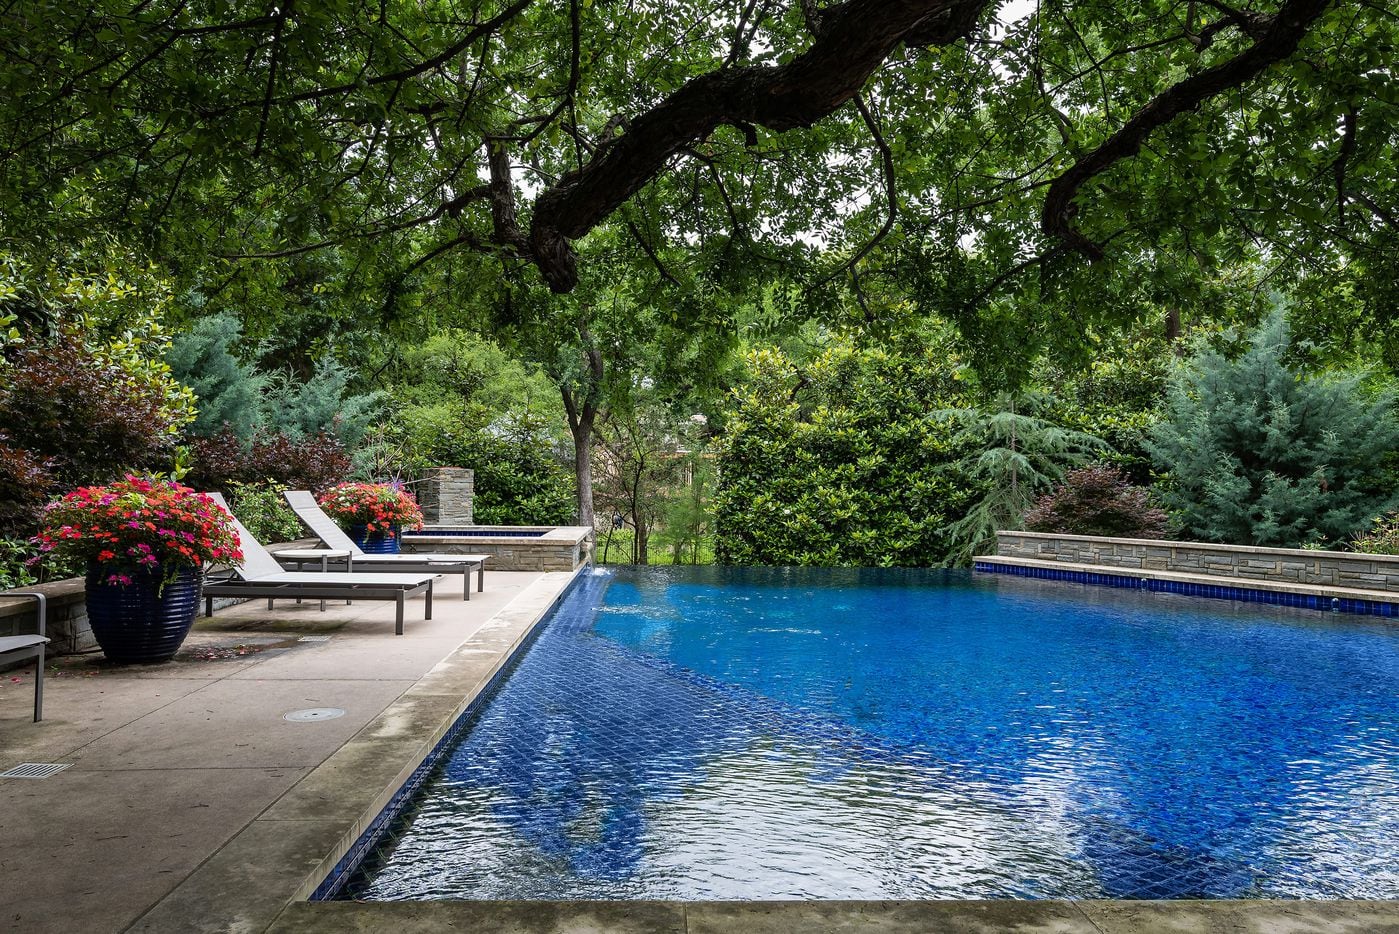 The terraced backyard at 9024 Broken Arrow Lane allows for multiple outdoor entertaining areas. There is also an infinity-edge pool that flows into a water feature.